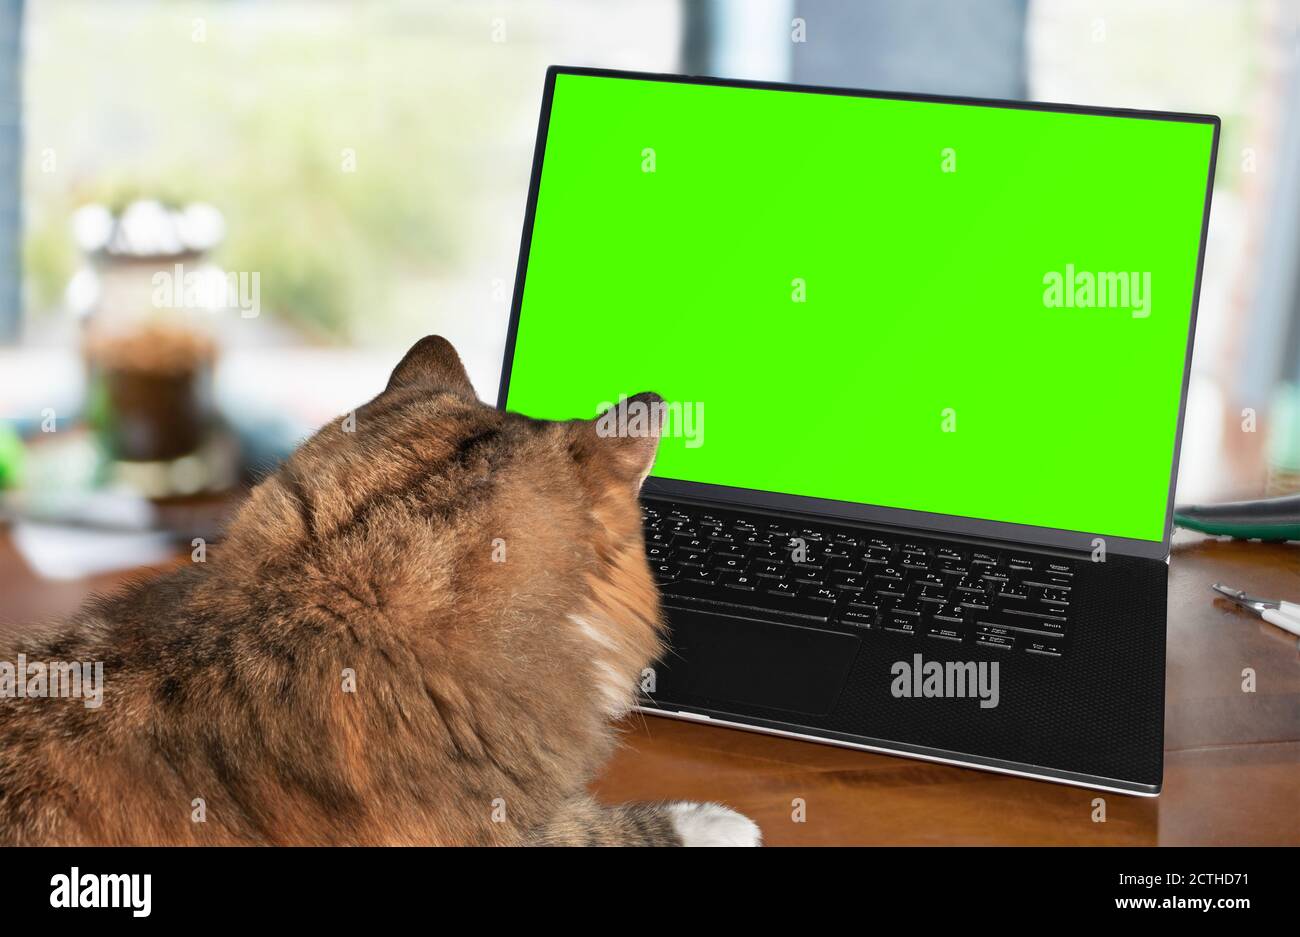 Back view of cat using a computer with green screen in home office. Concept for pets using computers to communicate virtually. Stock Photo